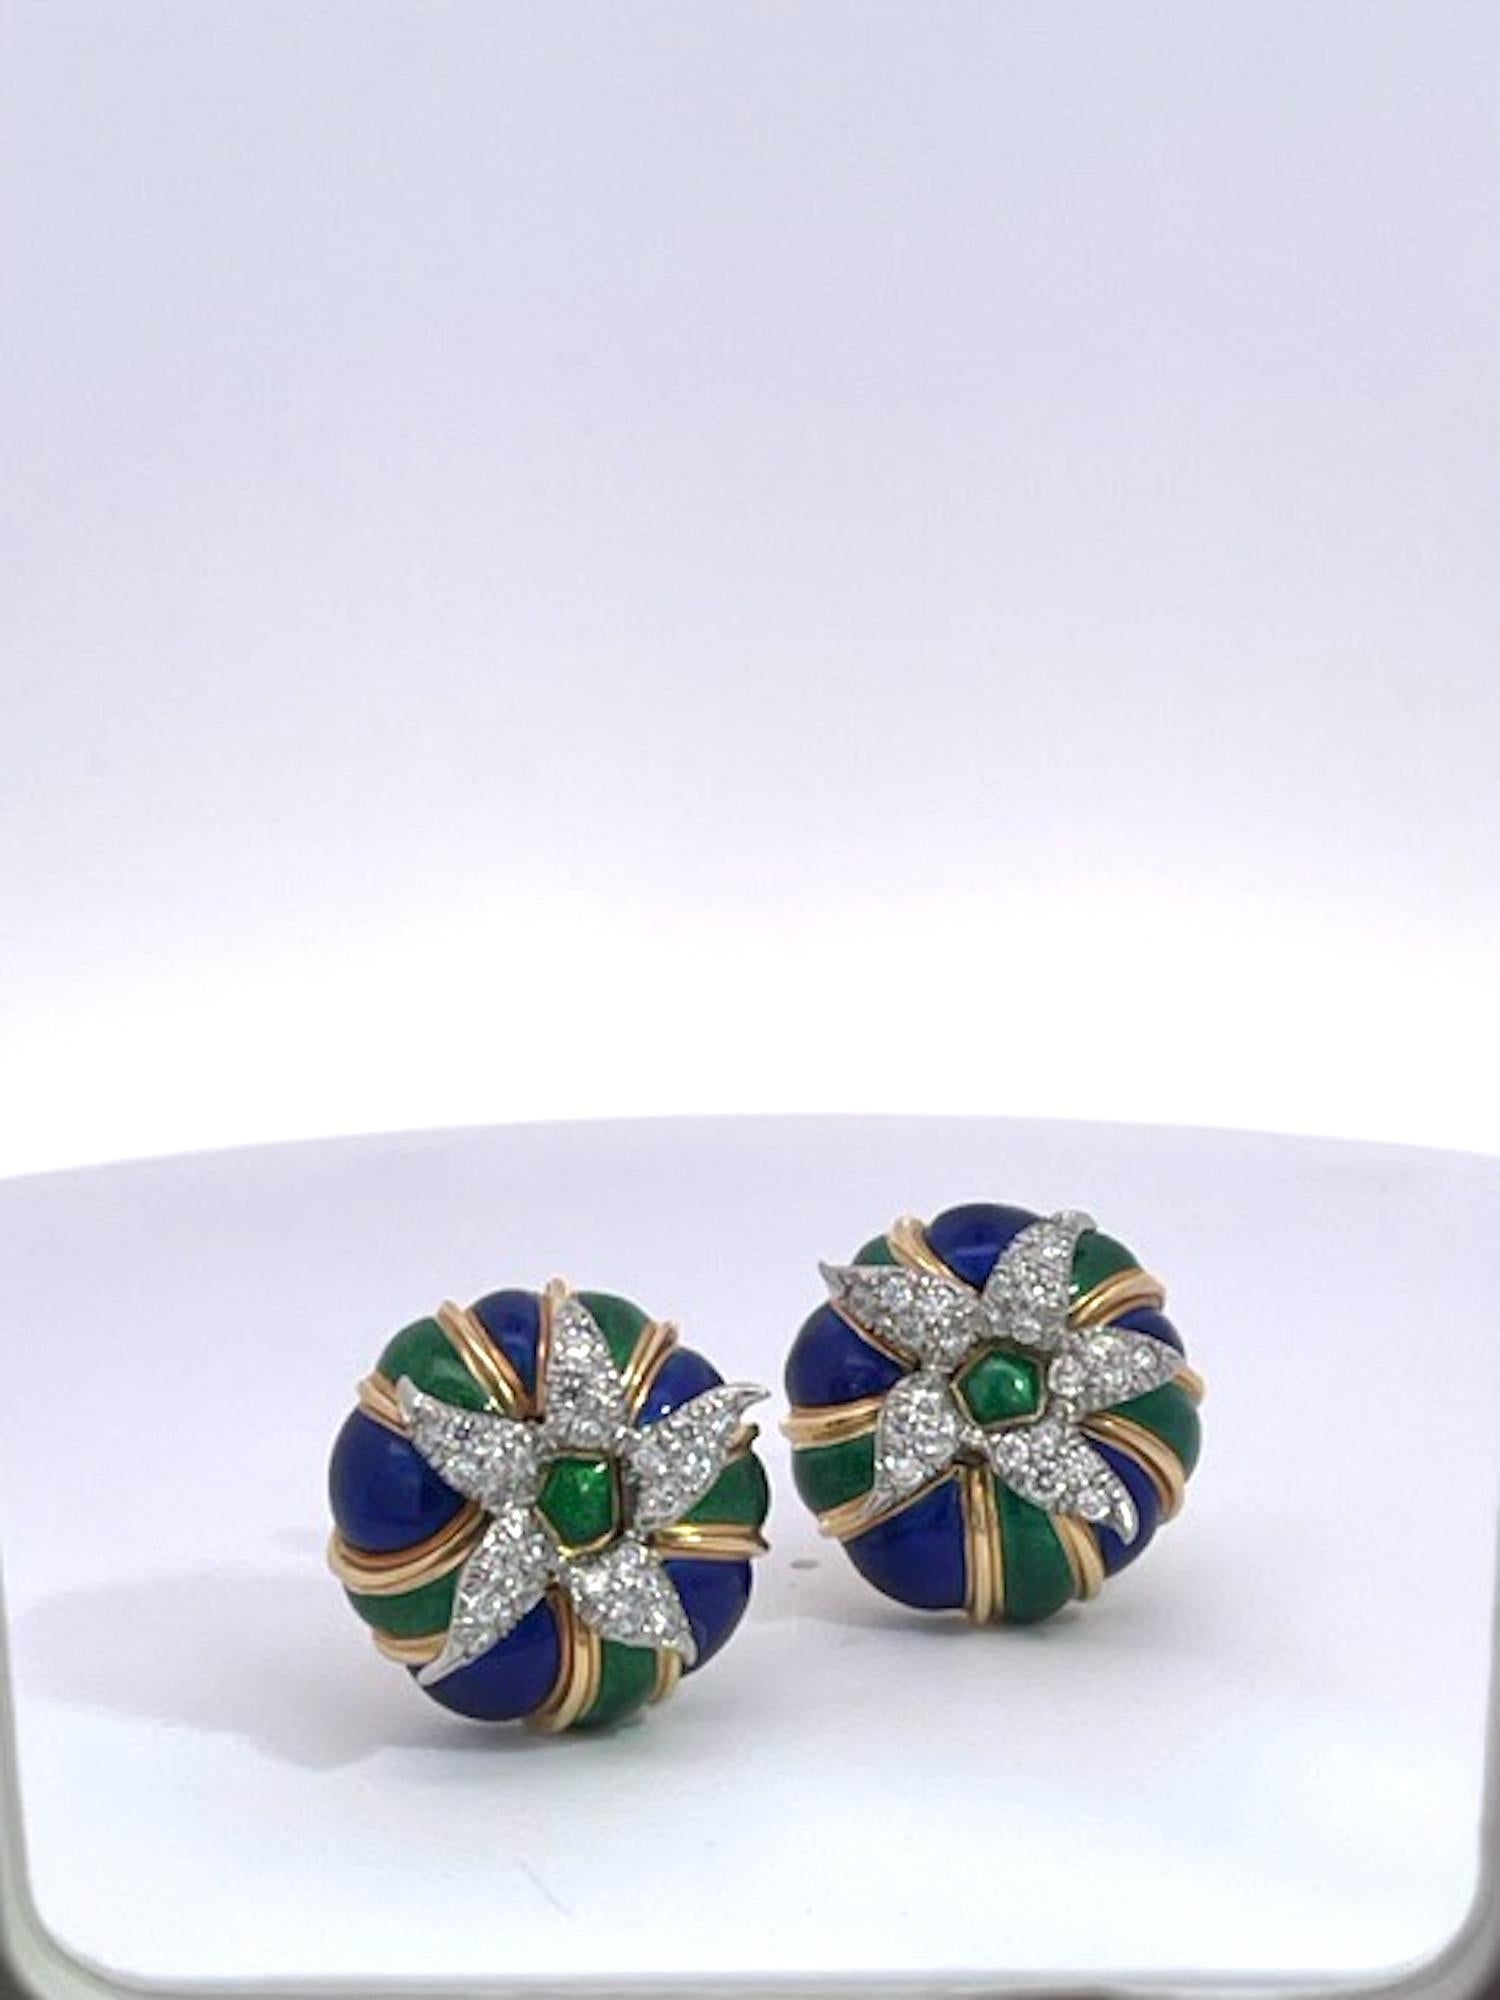 Tiffany Schlumberger Enamel Earrings 18K Diamonds In Excellent Condition For Sale In North Hollywood, CA